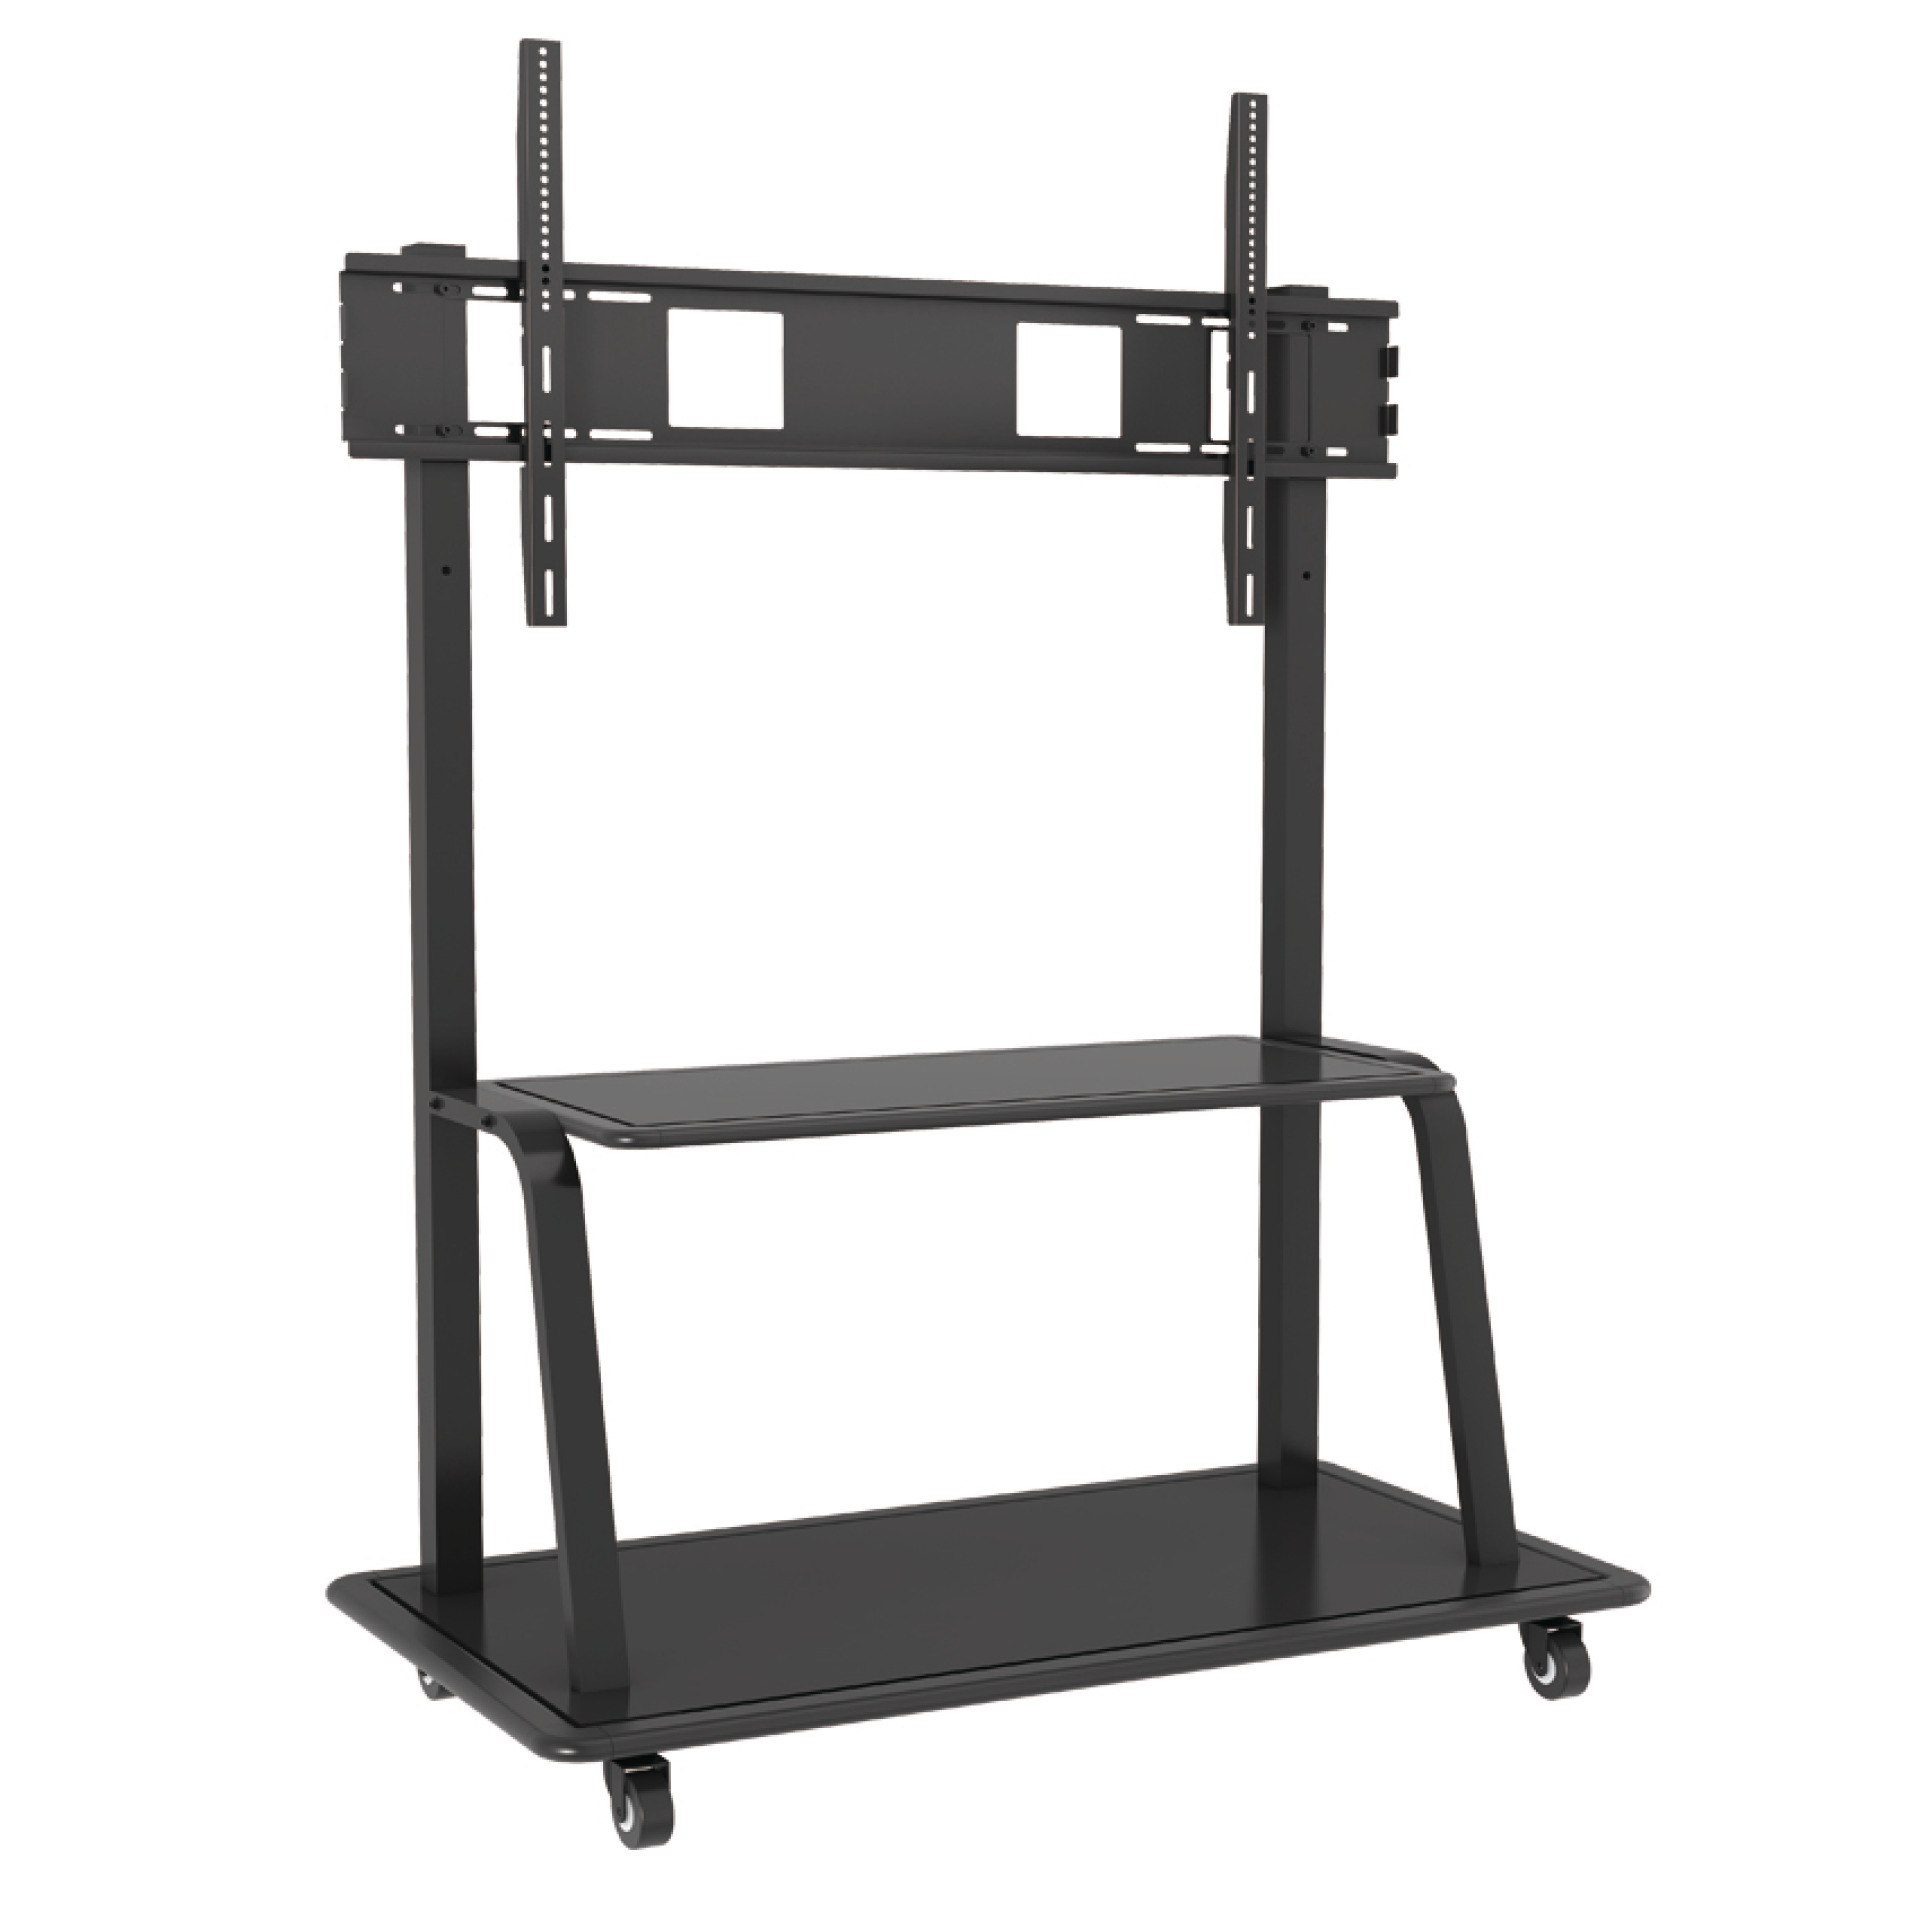 Trolley floor support for LCD LED TV 55-110", with shelf